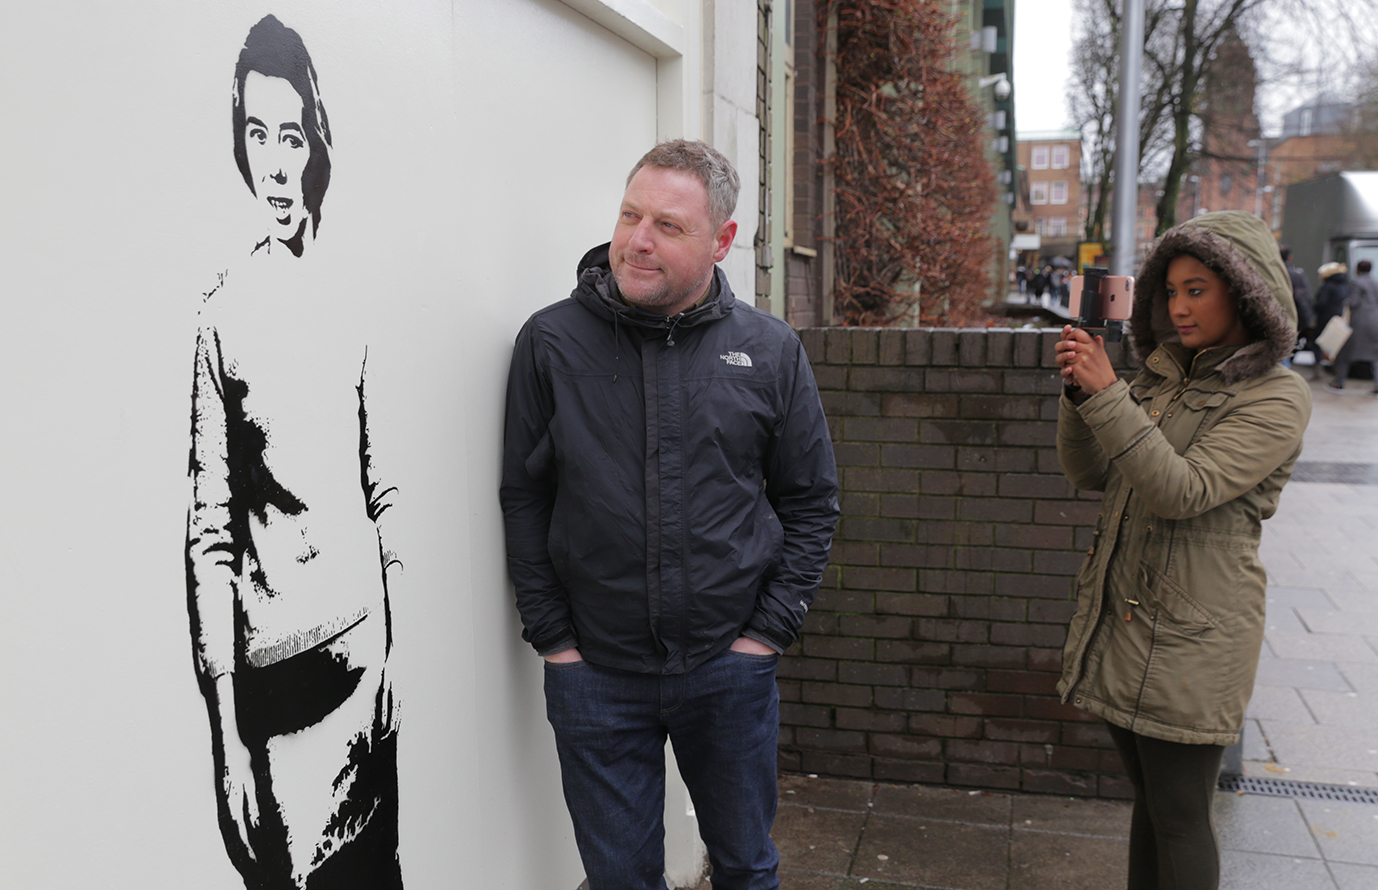 Graffiti artist, Stewy, posing next to his latest portrait of Delia Derbyshire, located outside the Ellen Terry building on campus.